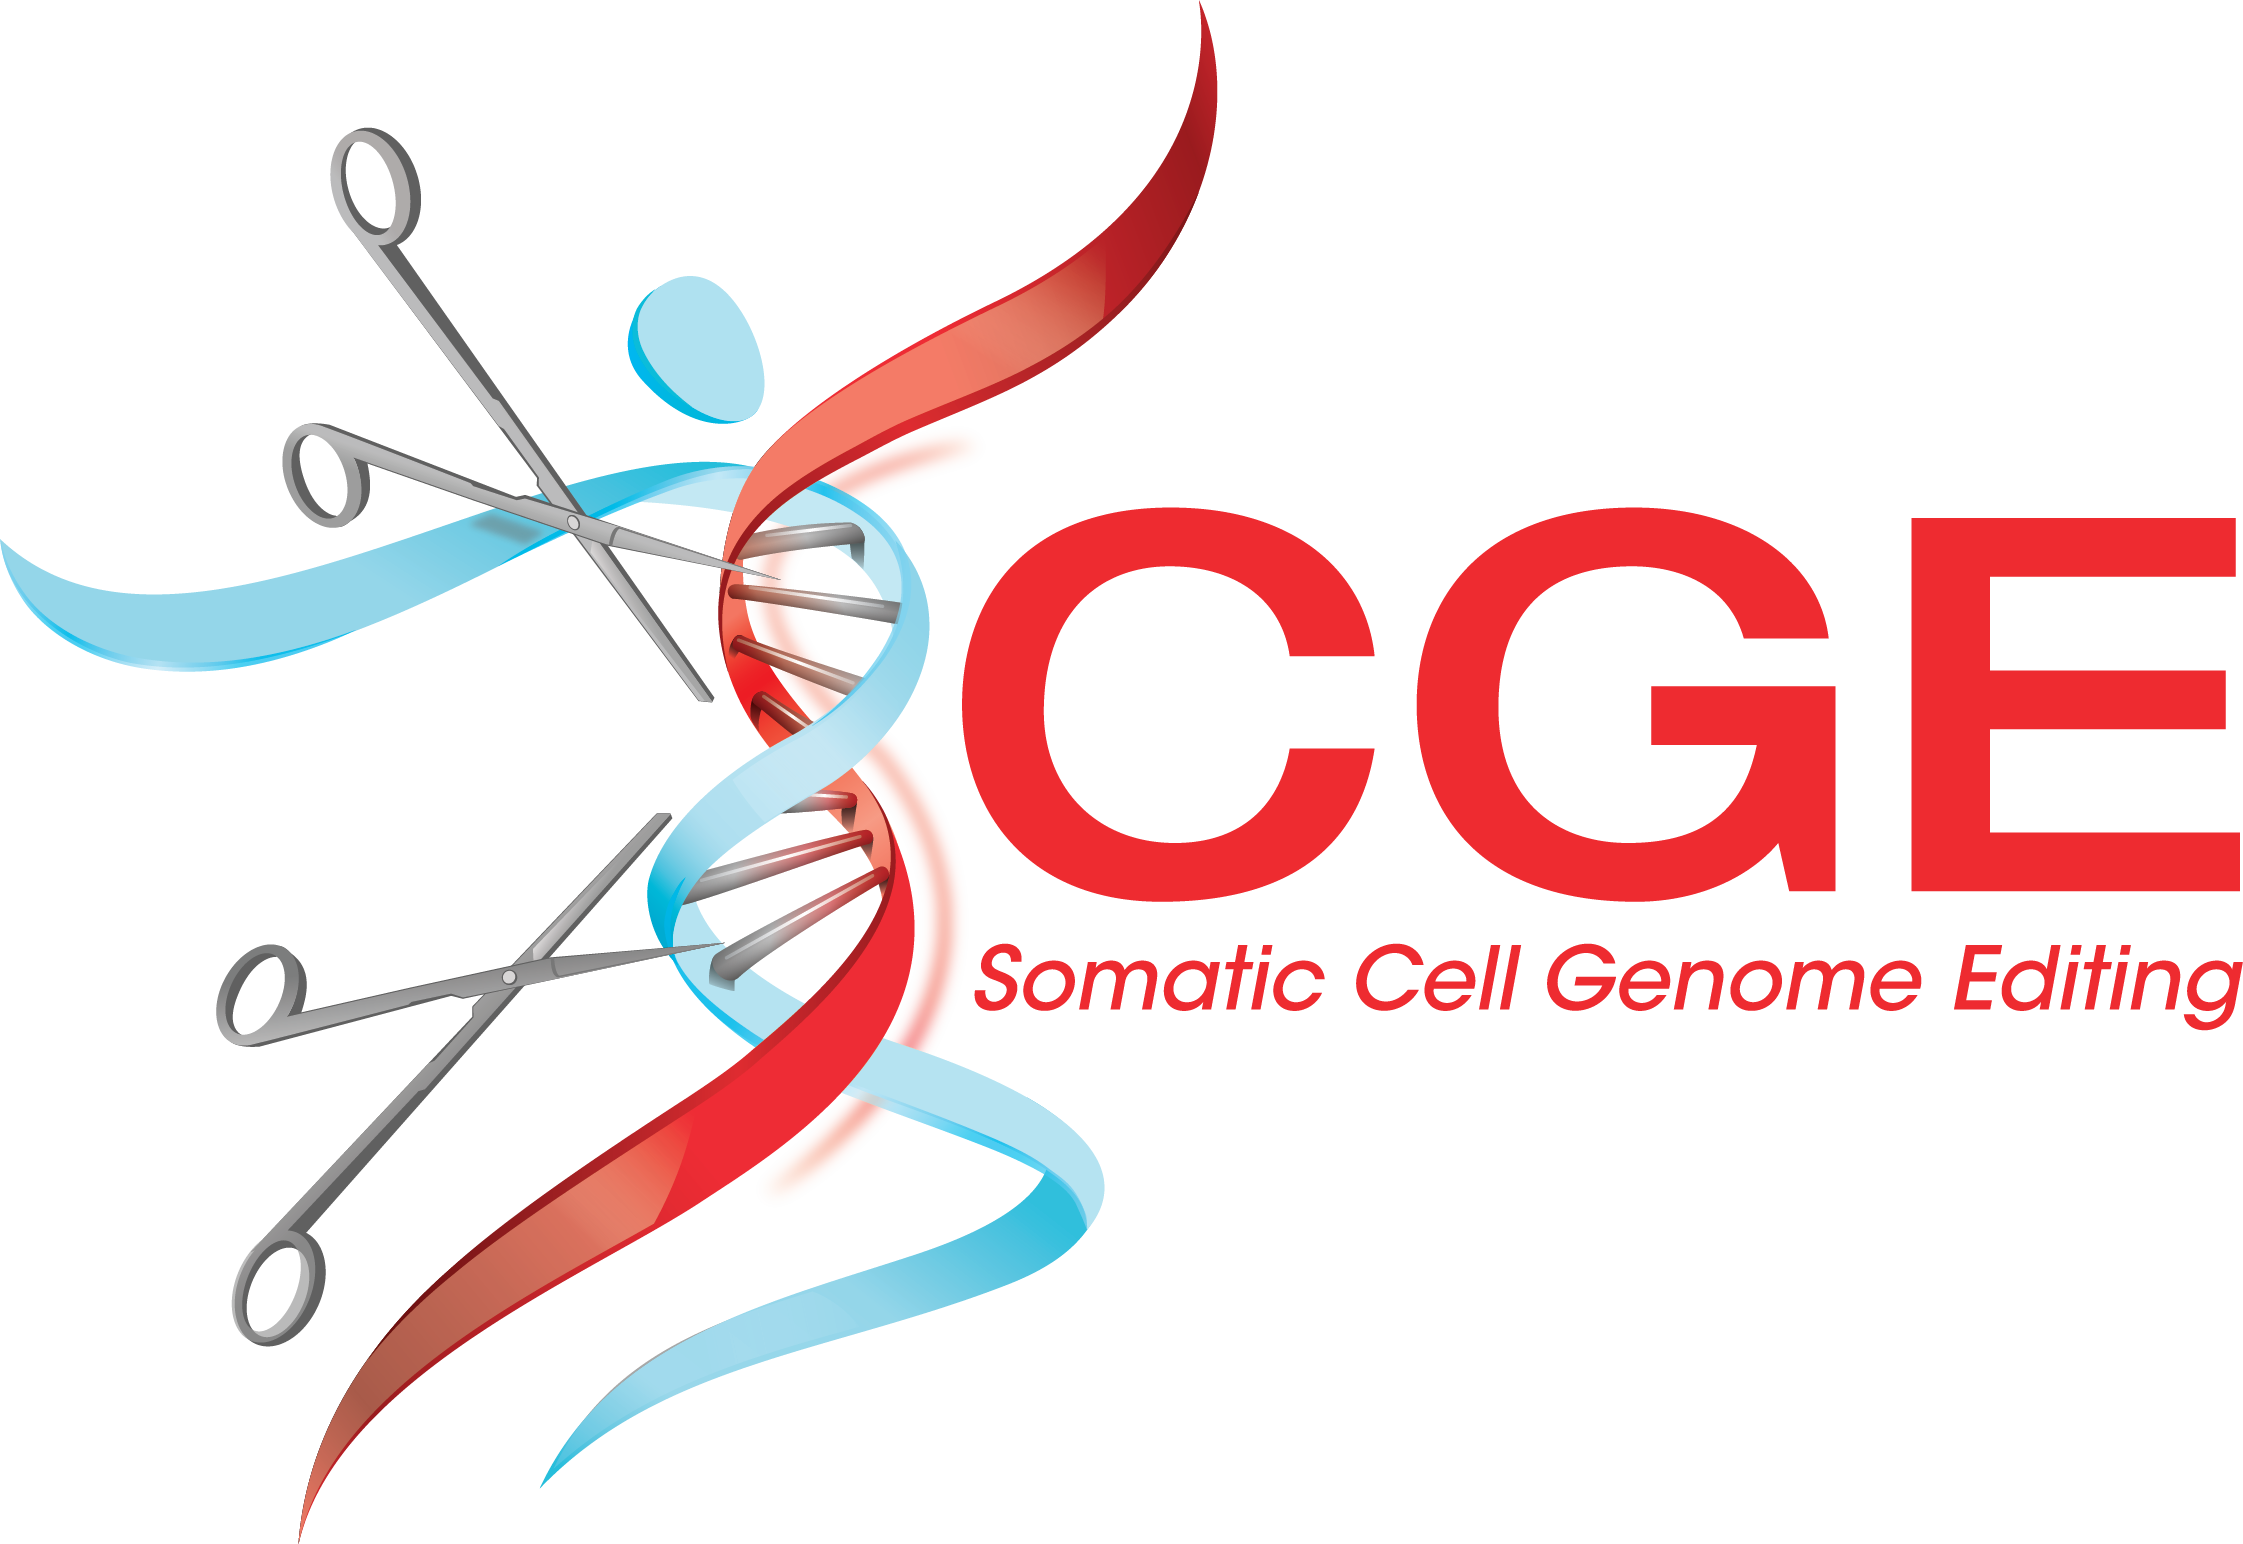 Somatic Cell Genome Editing (SCGE) logo.